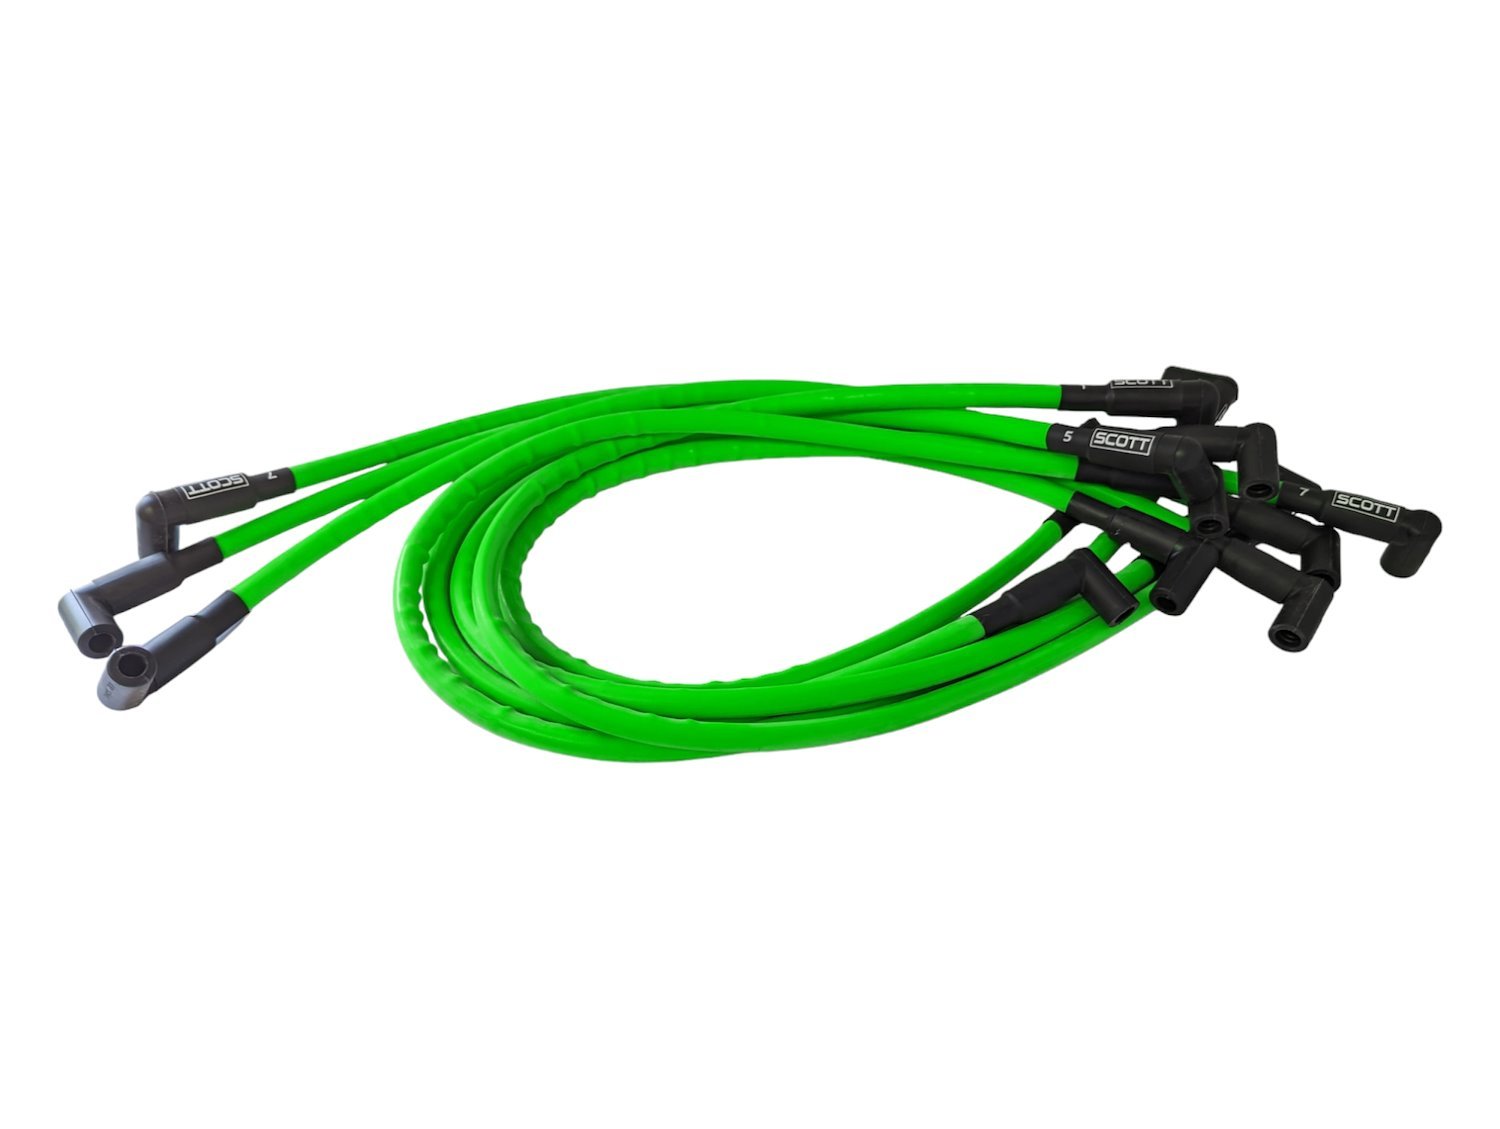 SPW300-CH-435-8 Super Mag Fiberglass-Oversleeved Spark Plug Wire Set for Small Block Chevy, Around Front [Green]